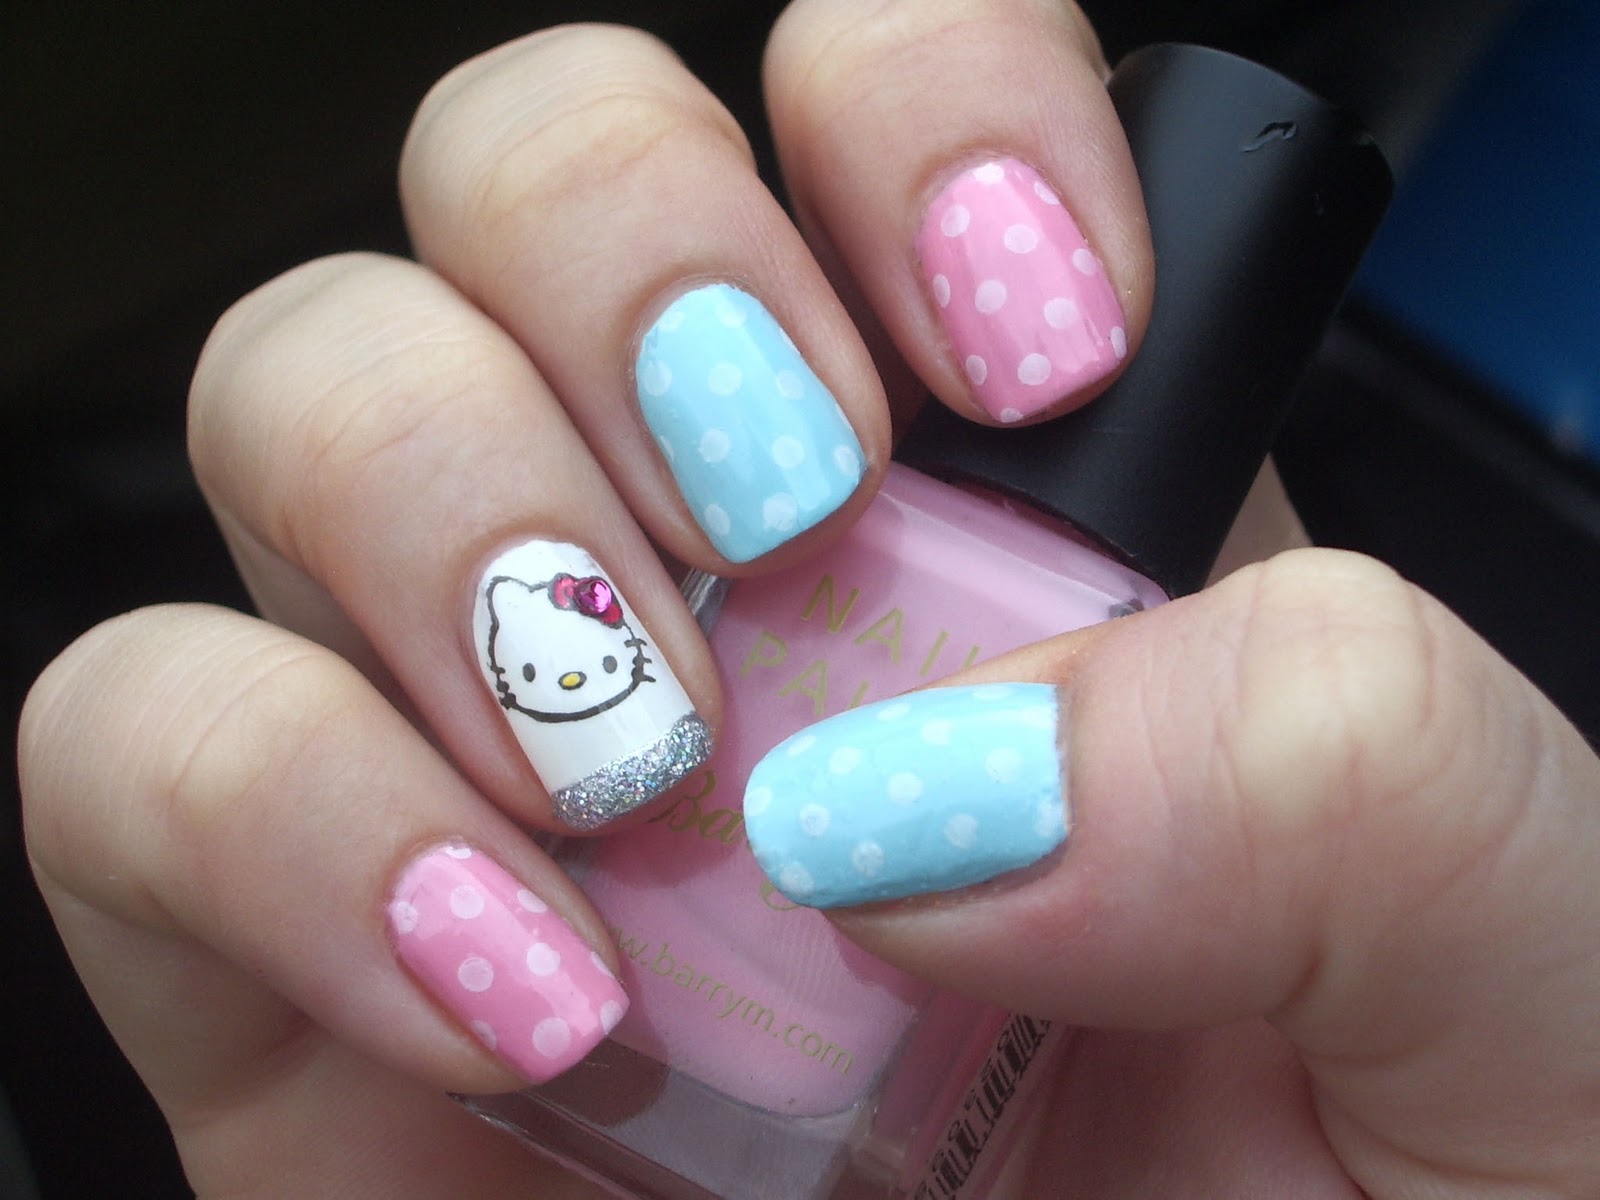 5. DIY Kitty Nail Art for Cat Lovers - wide 8